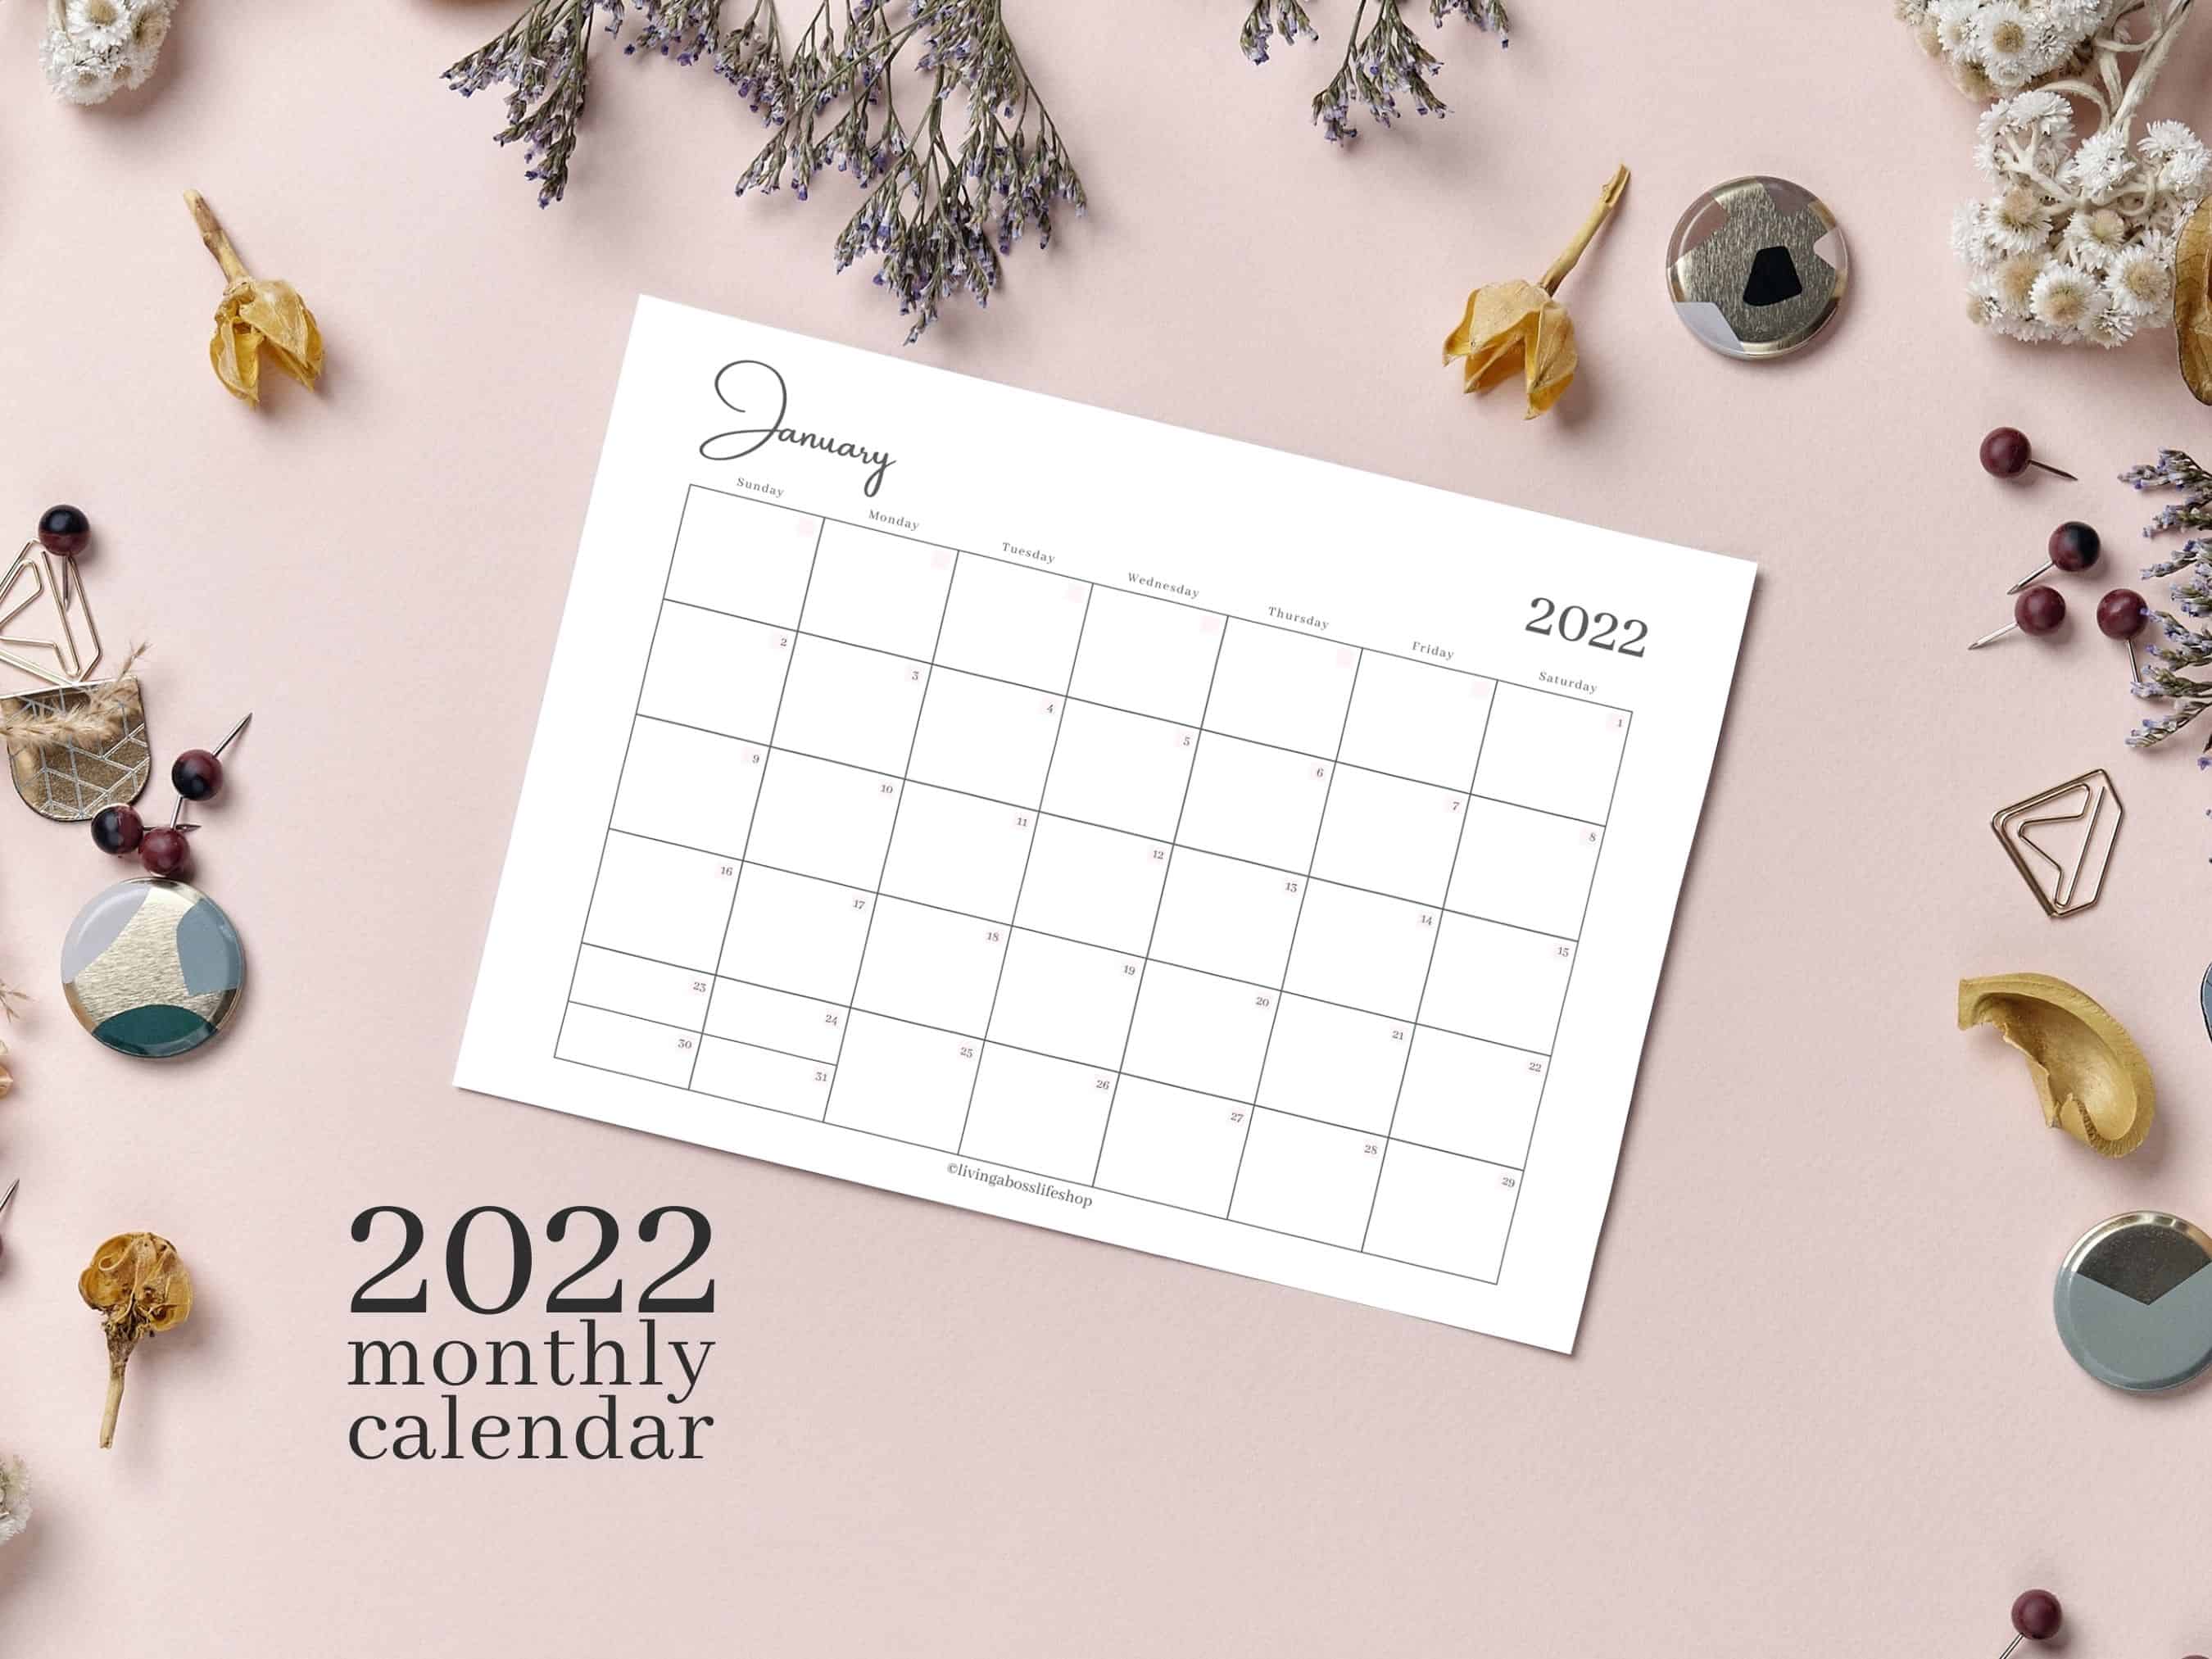 2022 Monthly Calendar Portrait edition. This minimalistic monthly calendar has a touch elegance while maintaining simplicity. Printable monthly calendar and use as a digital calendar with your favourite device! #PrintableCalendar #2022PrintableCalendar #2022MonthlyCalendar #2022PrintableMonthlyCalendar #2022DigitalMonthlyCalendar 